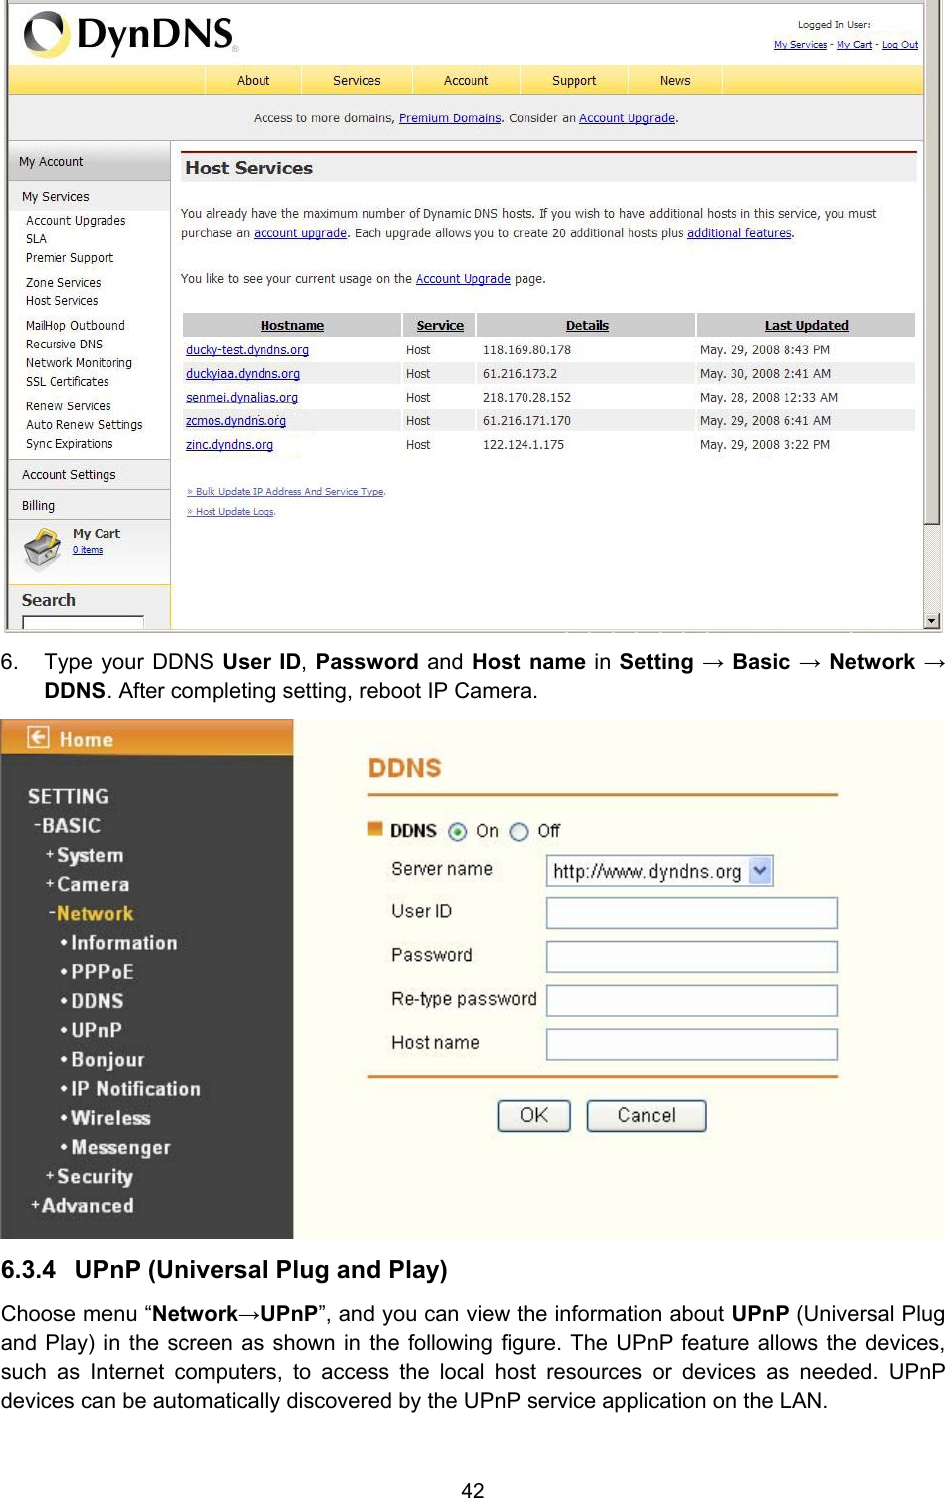 42  6.  Type your DDNS User ID, Password and Host name in Setting → Basic → Network → DDNS. After completing setting, reboot IP Camera.  6.3.4  UPnP (Universal Plug and Play)  Choose menu “Network→UPnP”, and you can view the information about UPnP (Universal Plug and Play) in the screen as shown in the following figure. The UPnP feature allows the devices, such as Internet computers, to access the local host resources or devices as needed. UPnP devices can be automatically discovered by the UPnP service application on the LAN. 